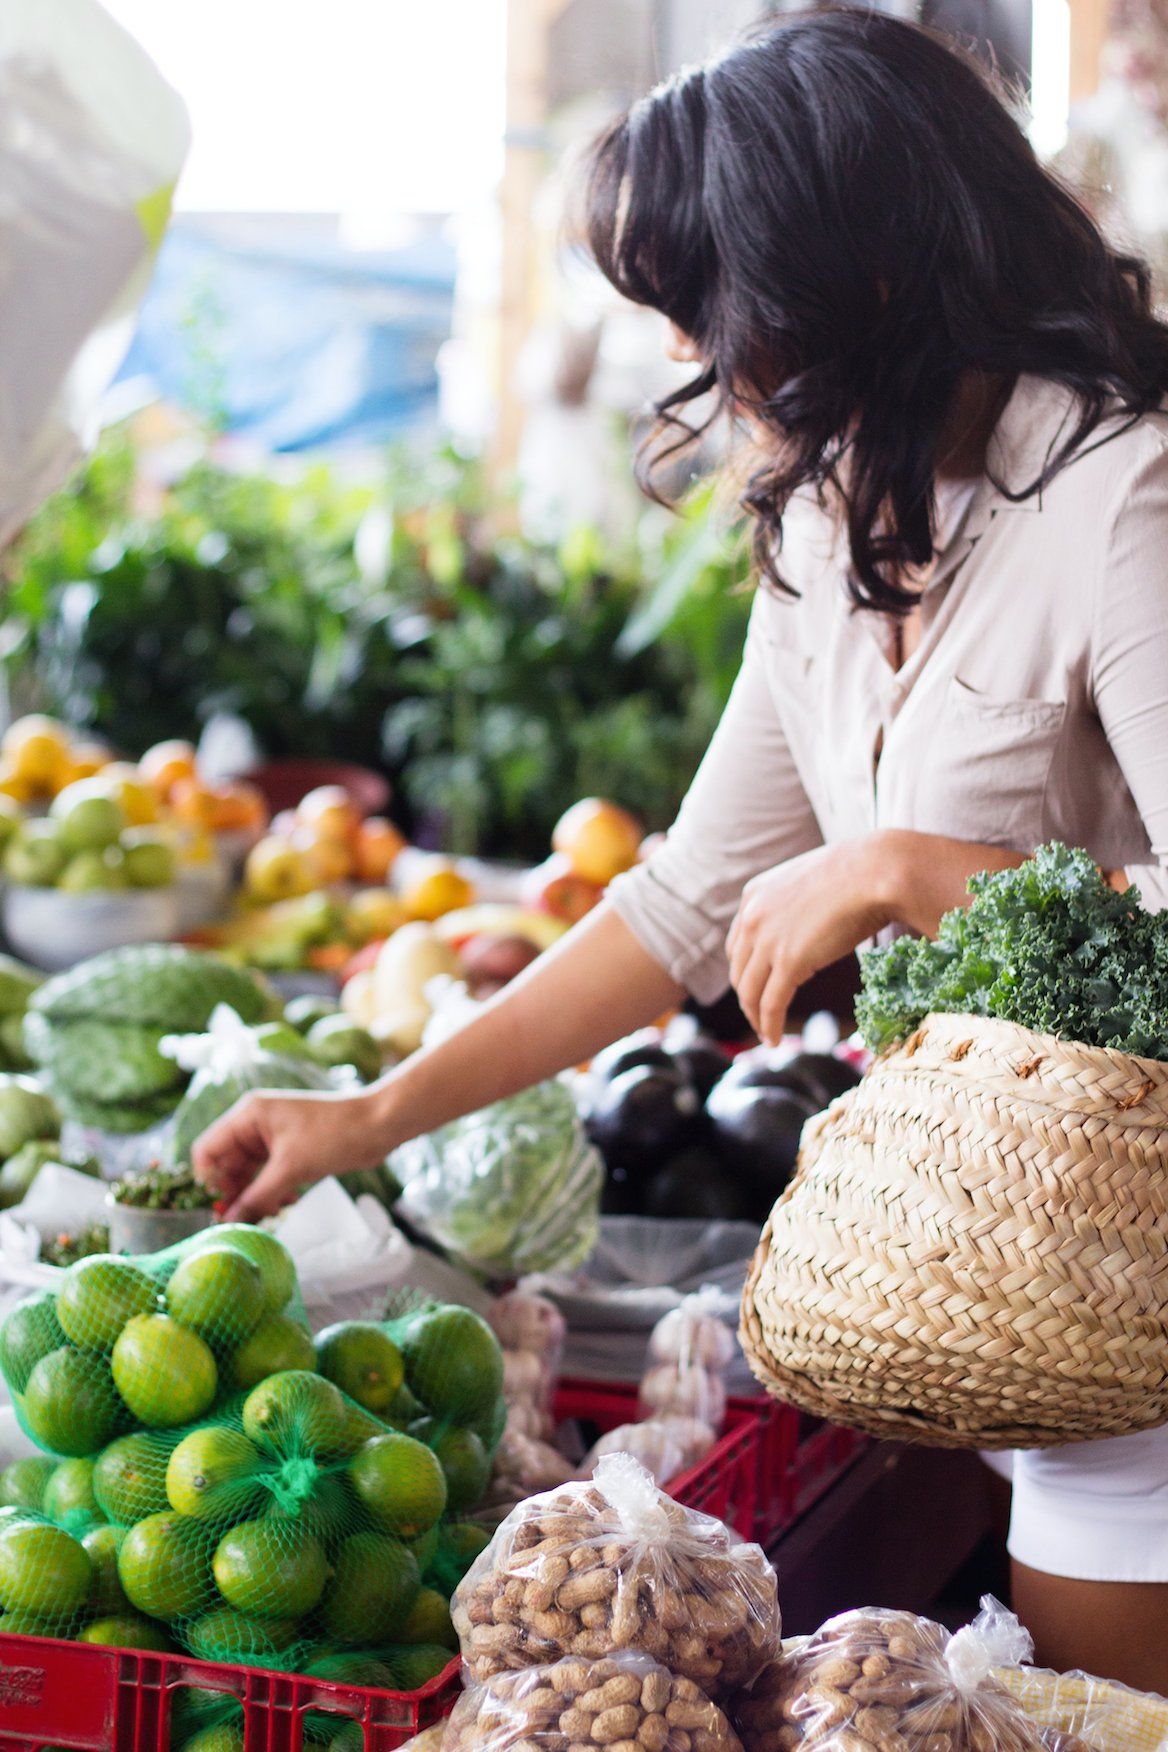 Buying Produce On A Budget | www.LiveSimplyNatural.com